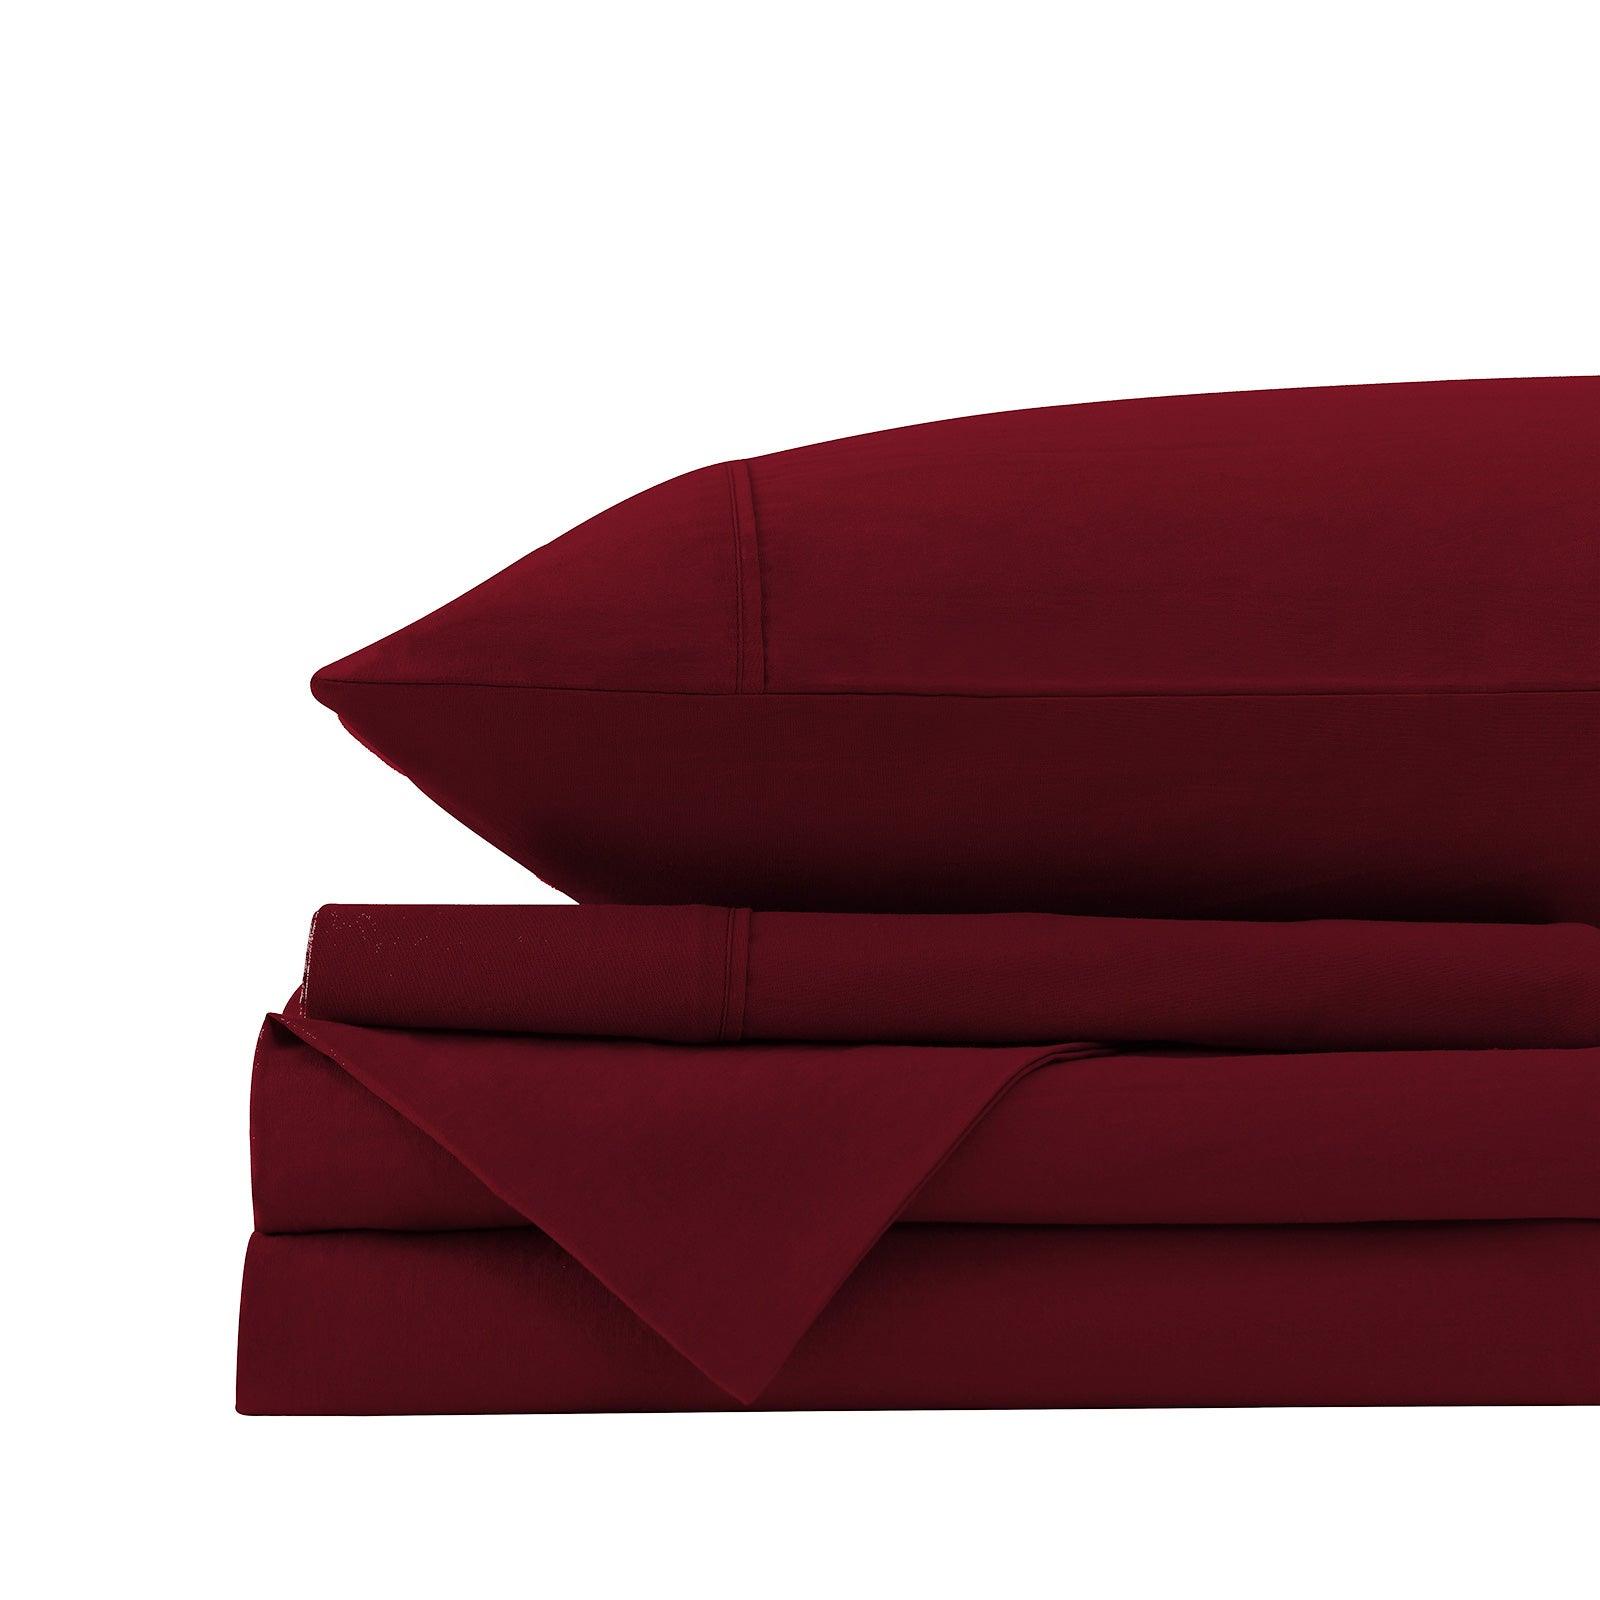 Royal Comfort Vintage Washed 100% Cotton Sheet Set Fitted Flat Sheet Pillowcases - Double - Mulled Wine